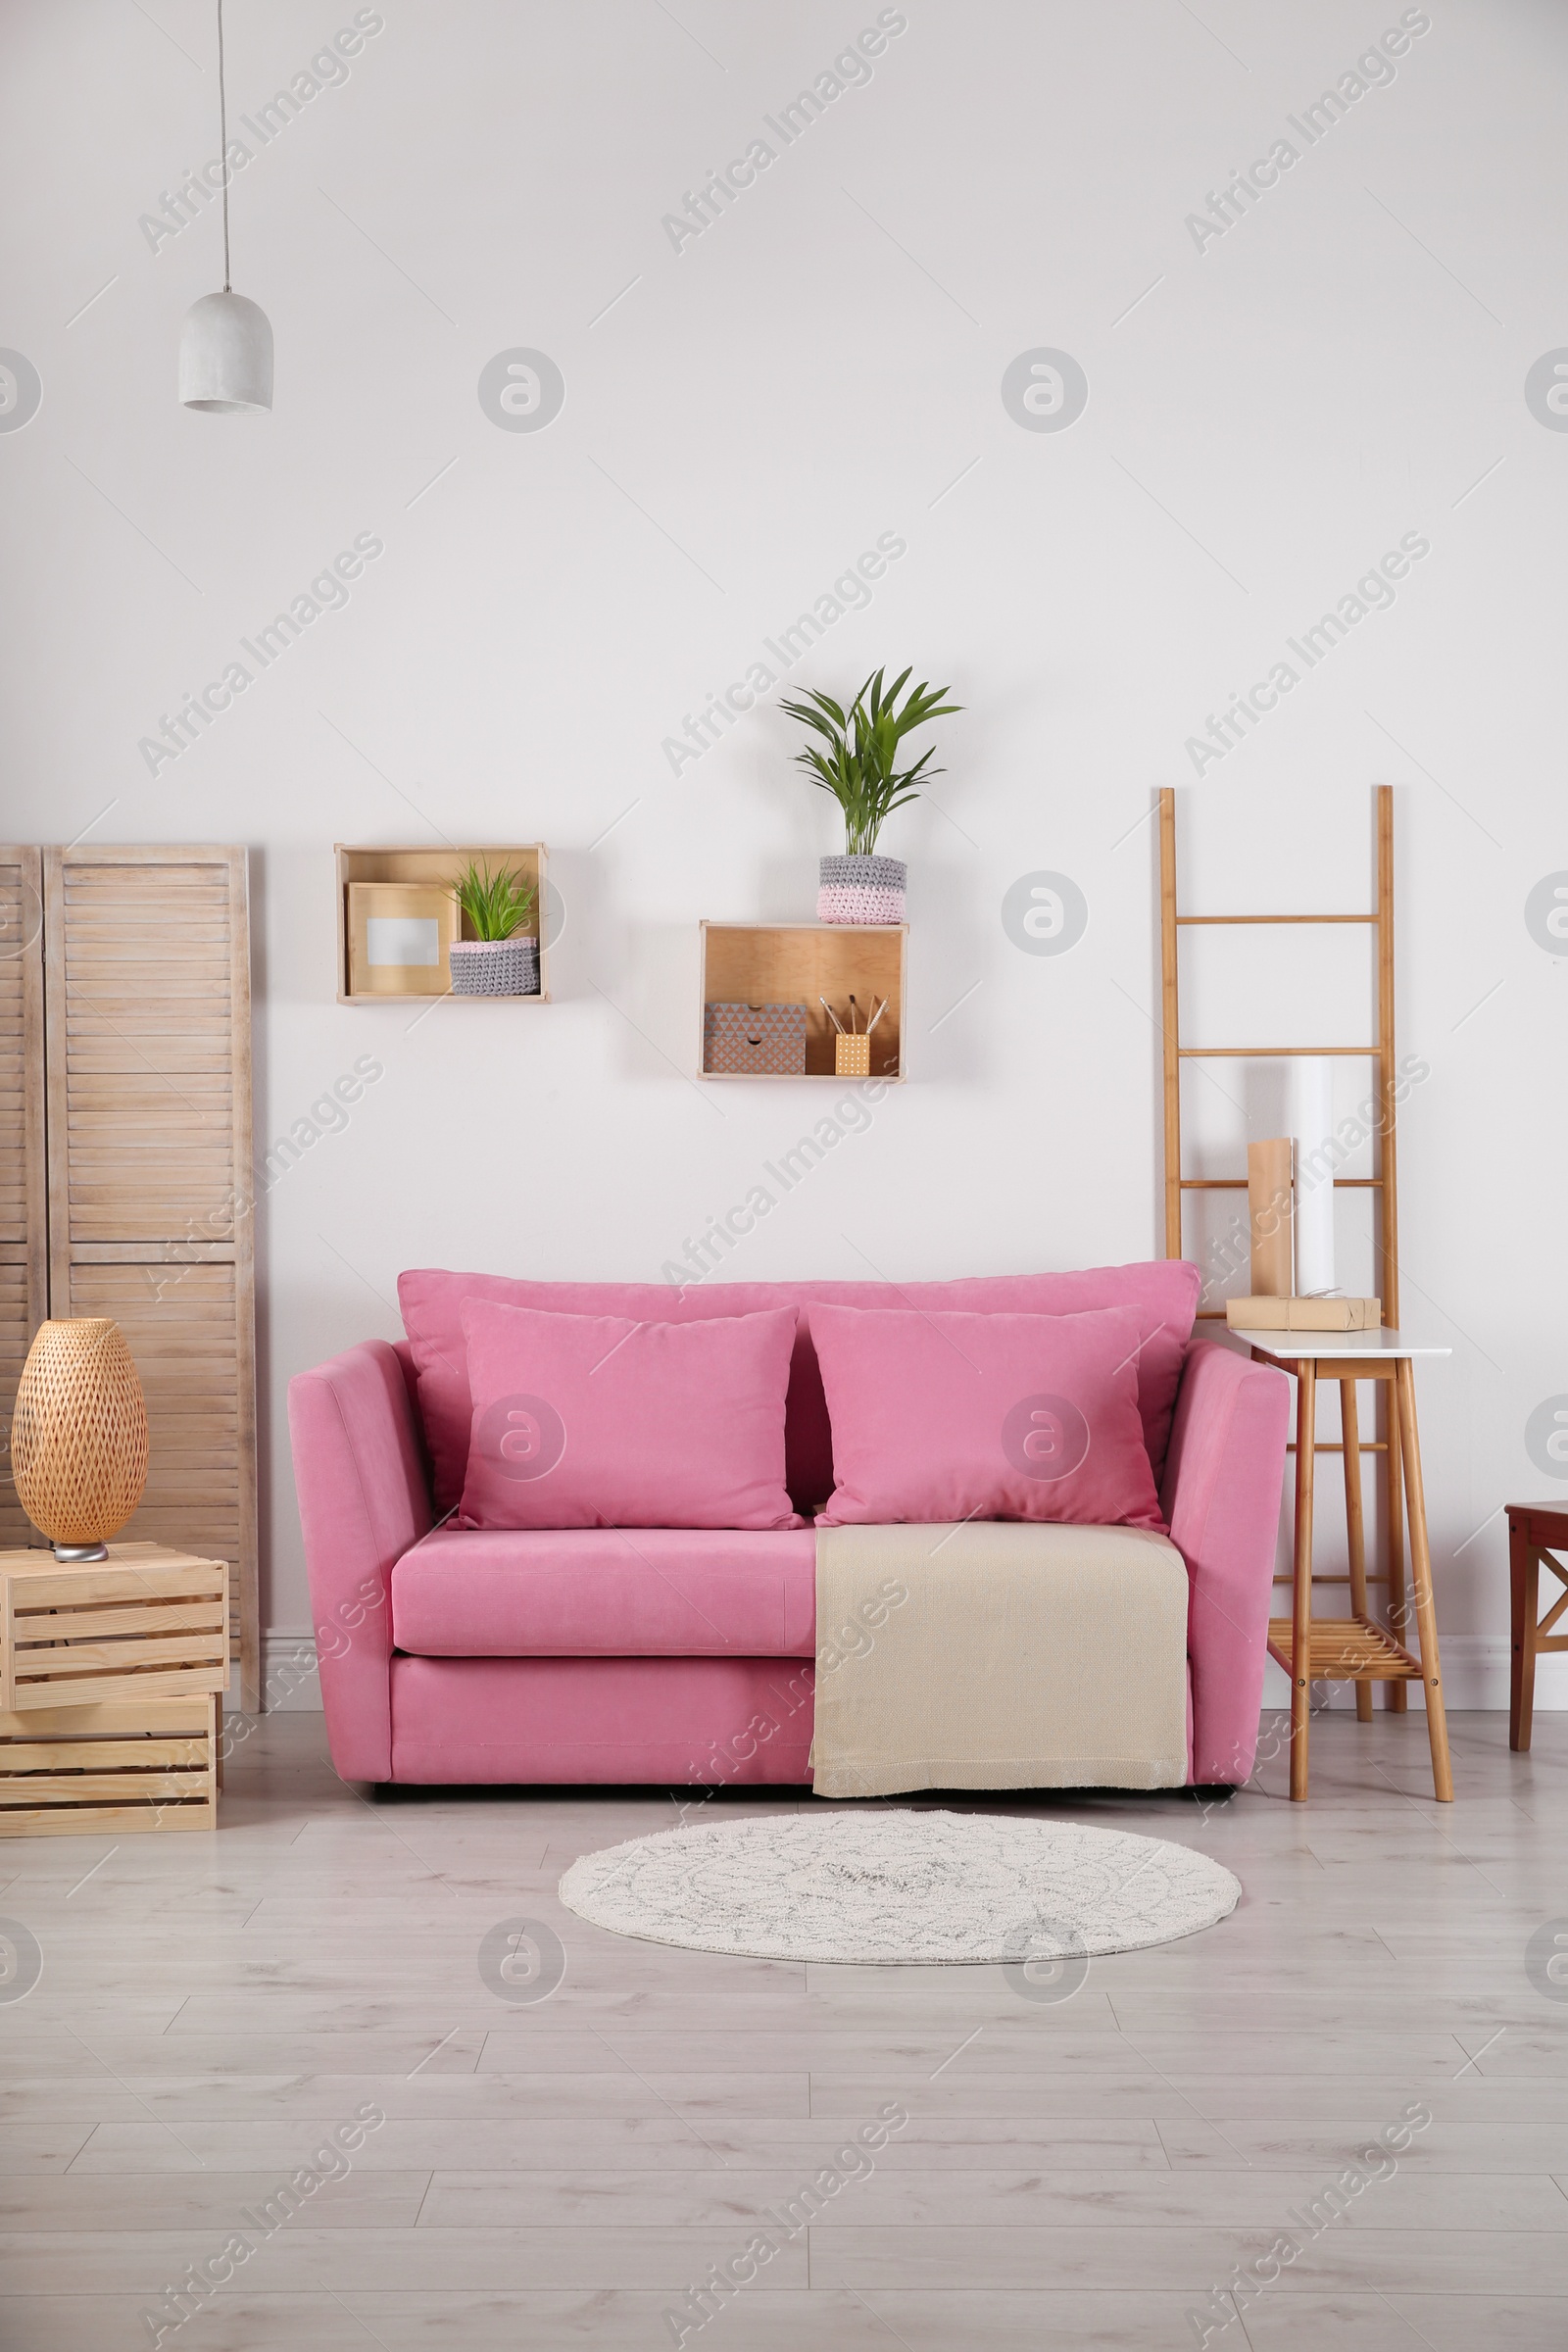 Photo of Modern living room interior with stylish pink sofa